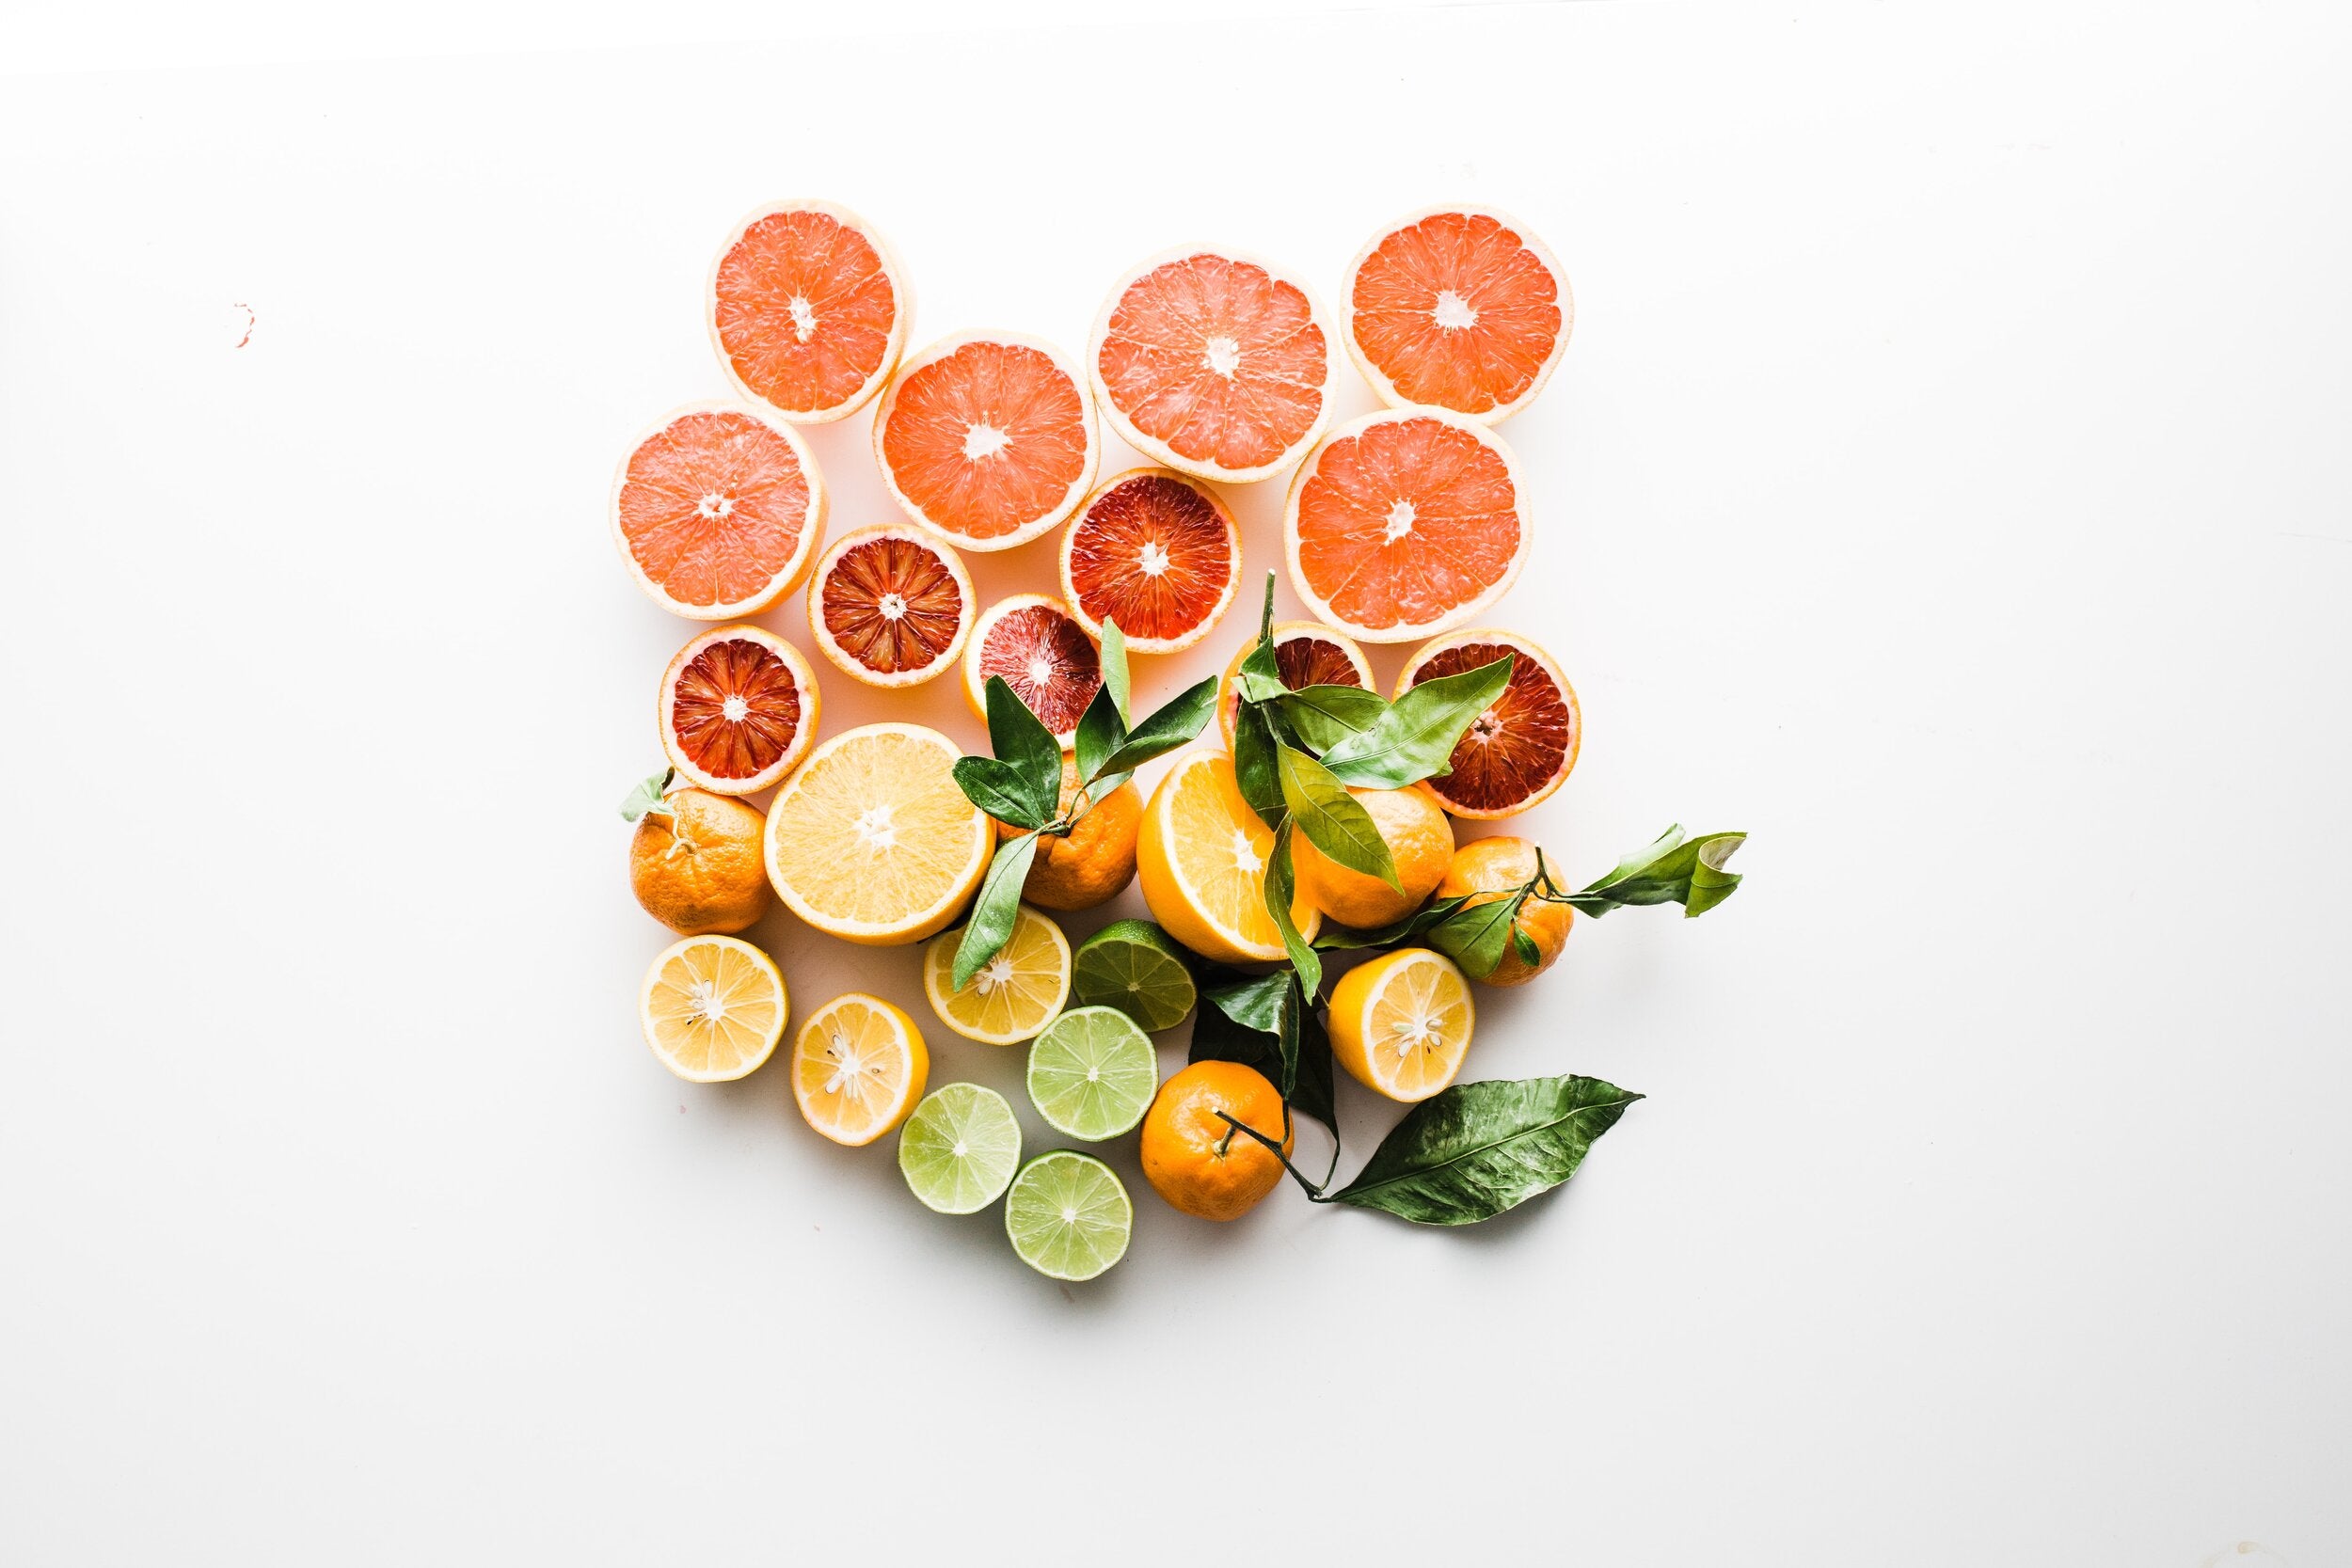 VITAMIN-C: What does it do for the skin?